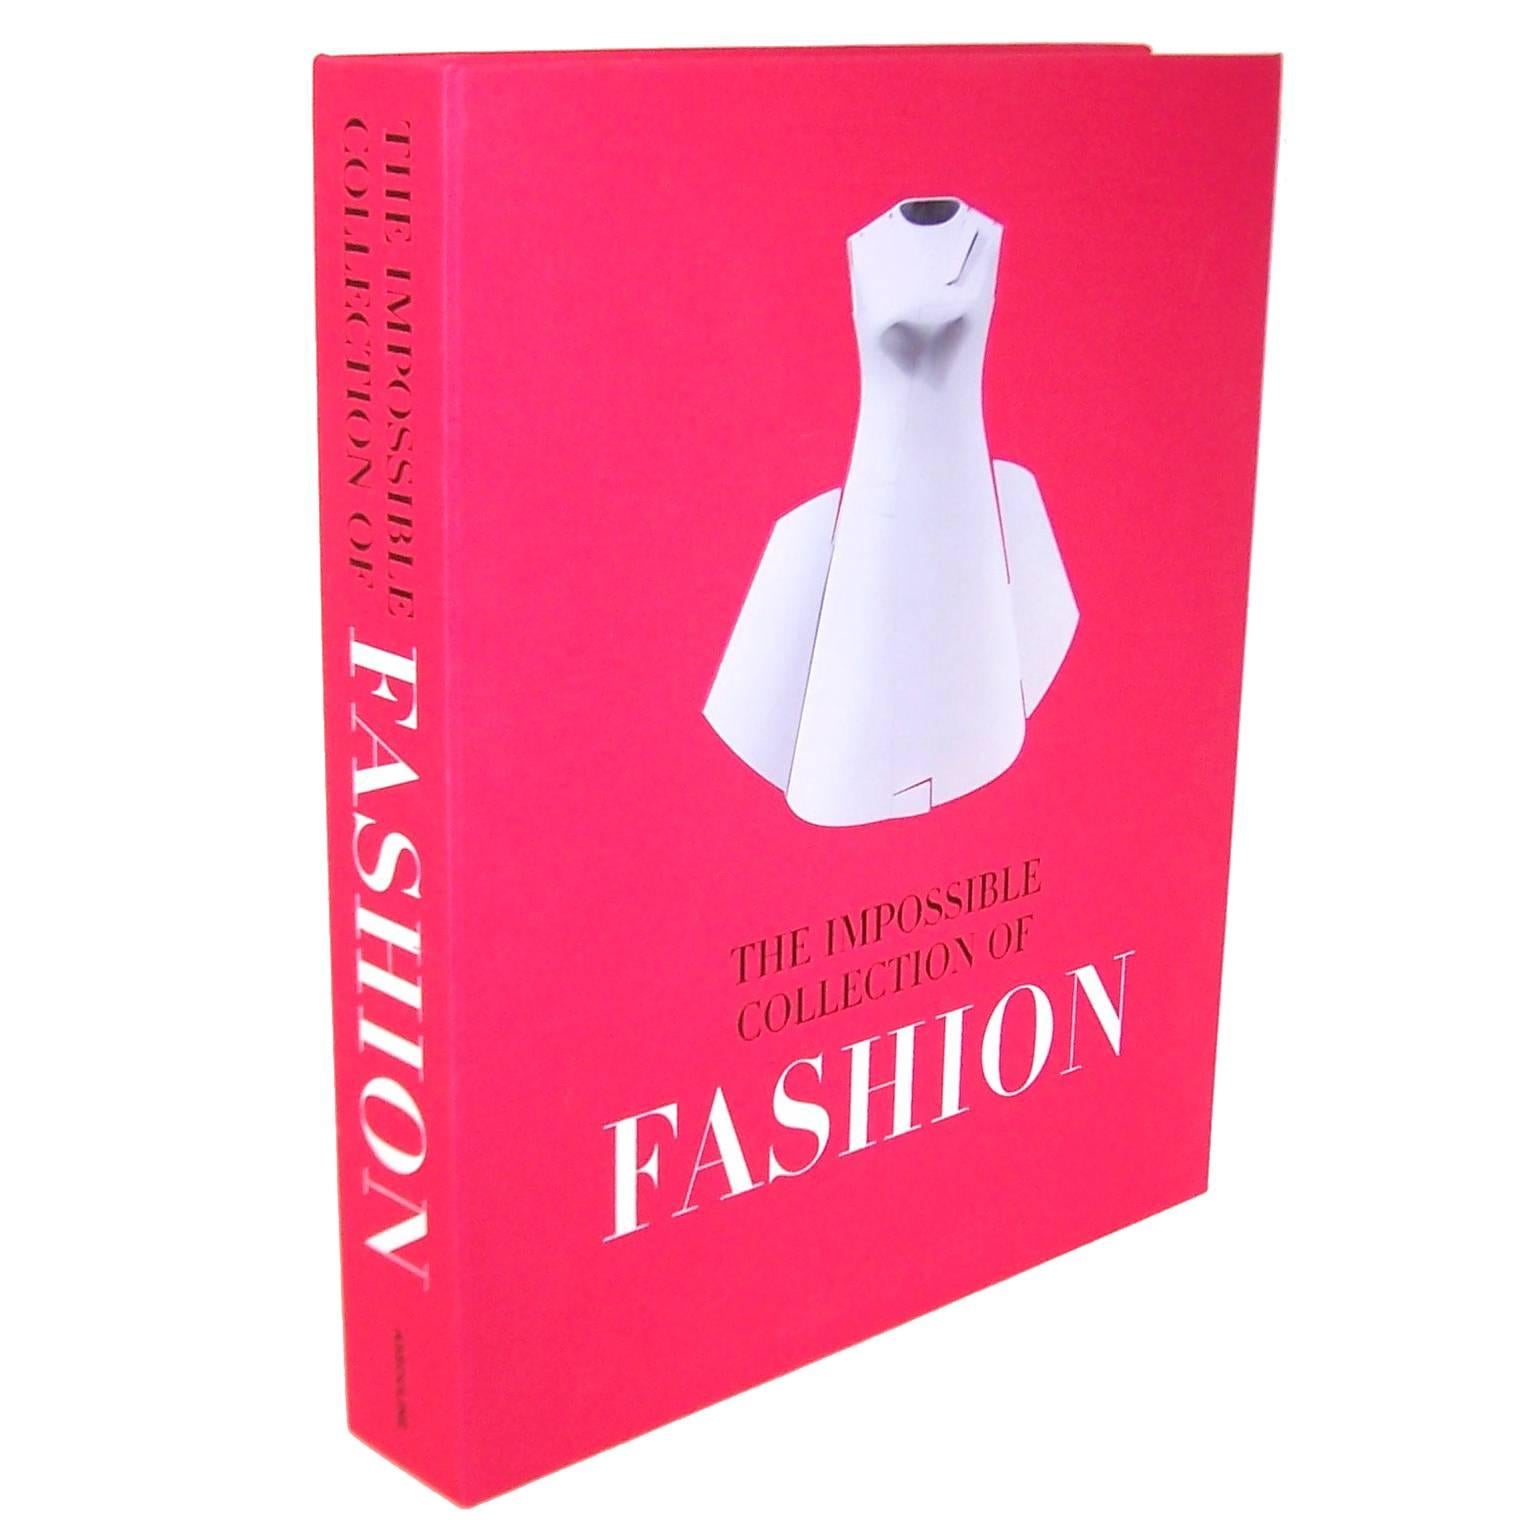 2011 Presentation Coffee Table Book of The Impossible Collection of Fashion